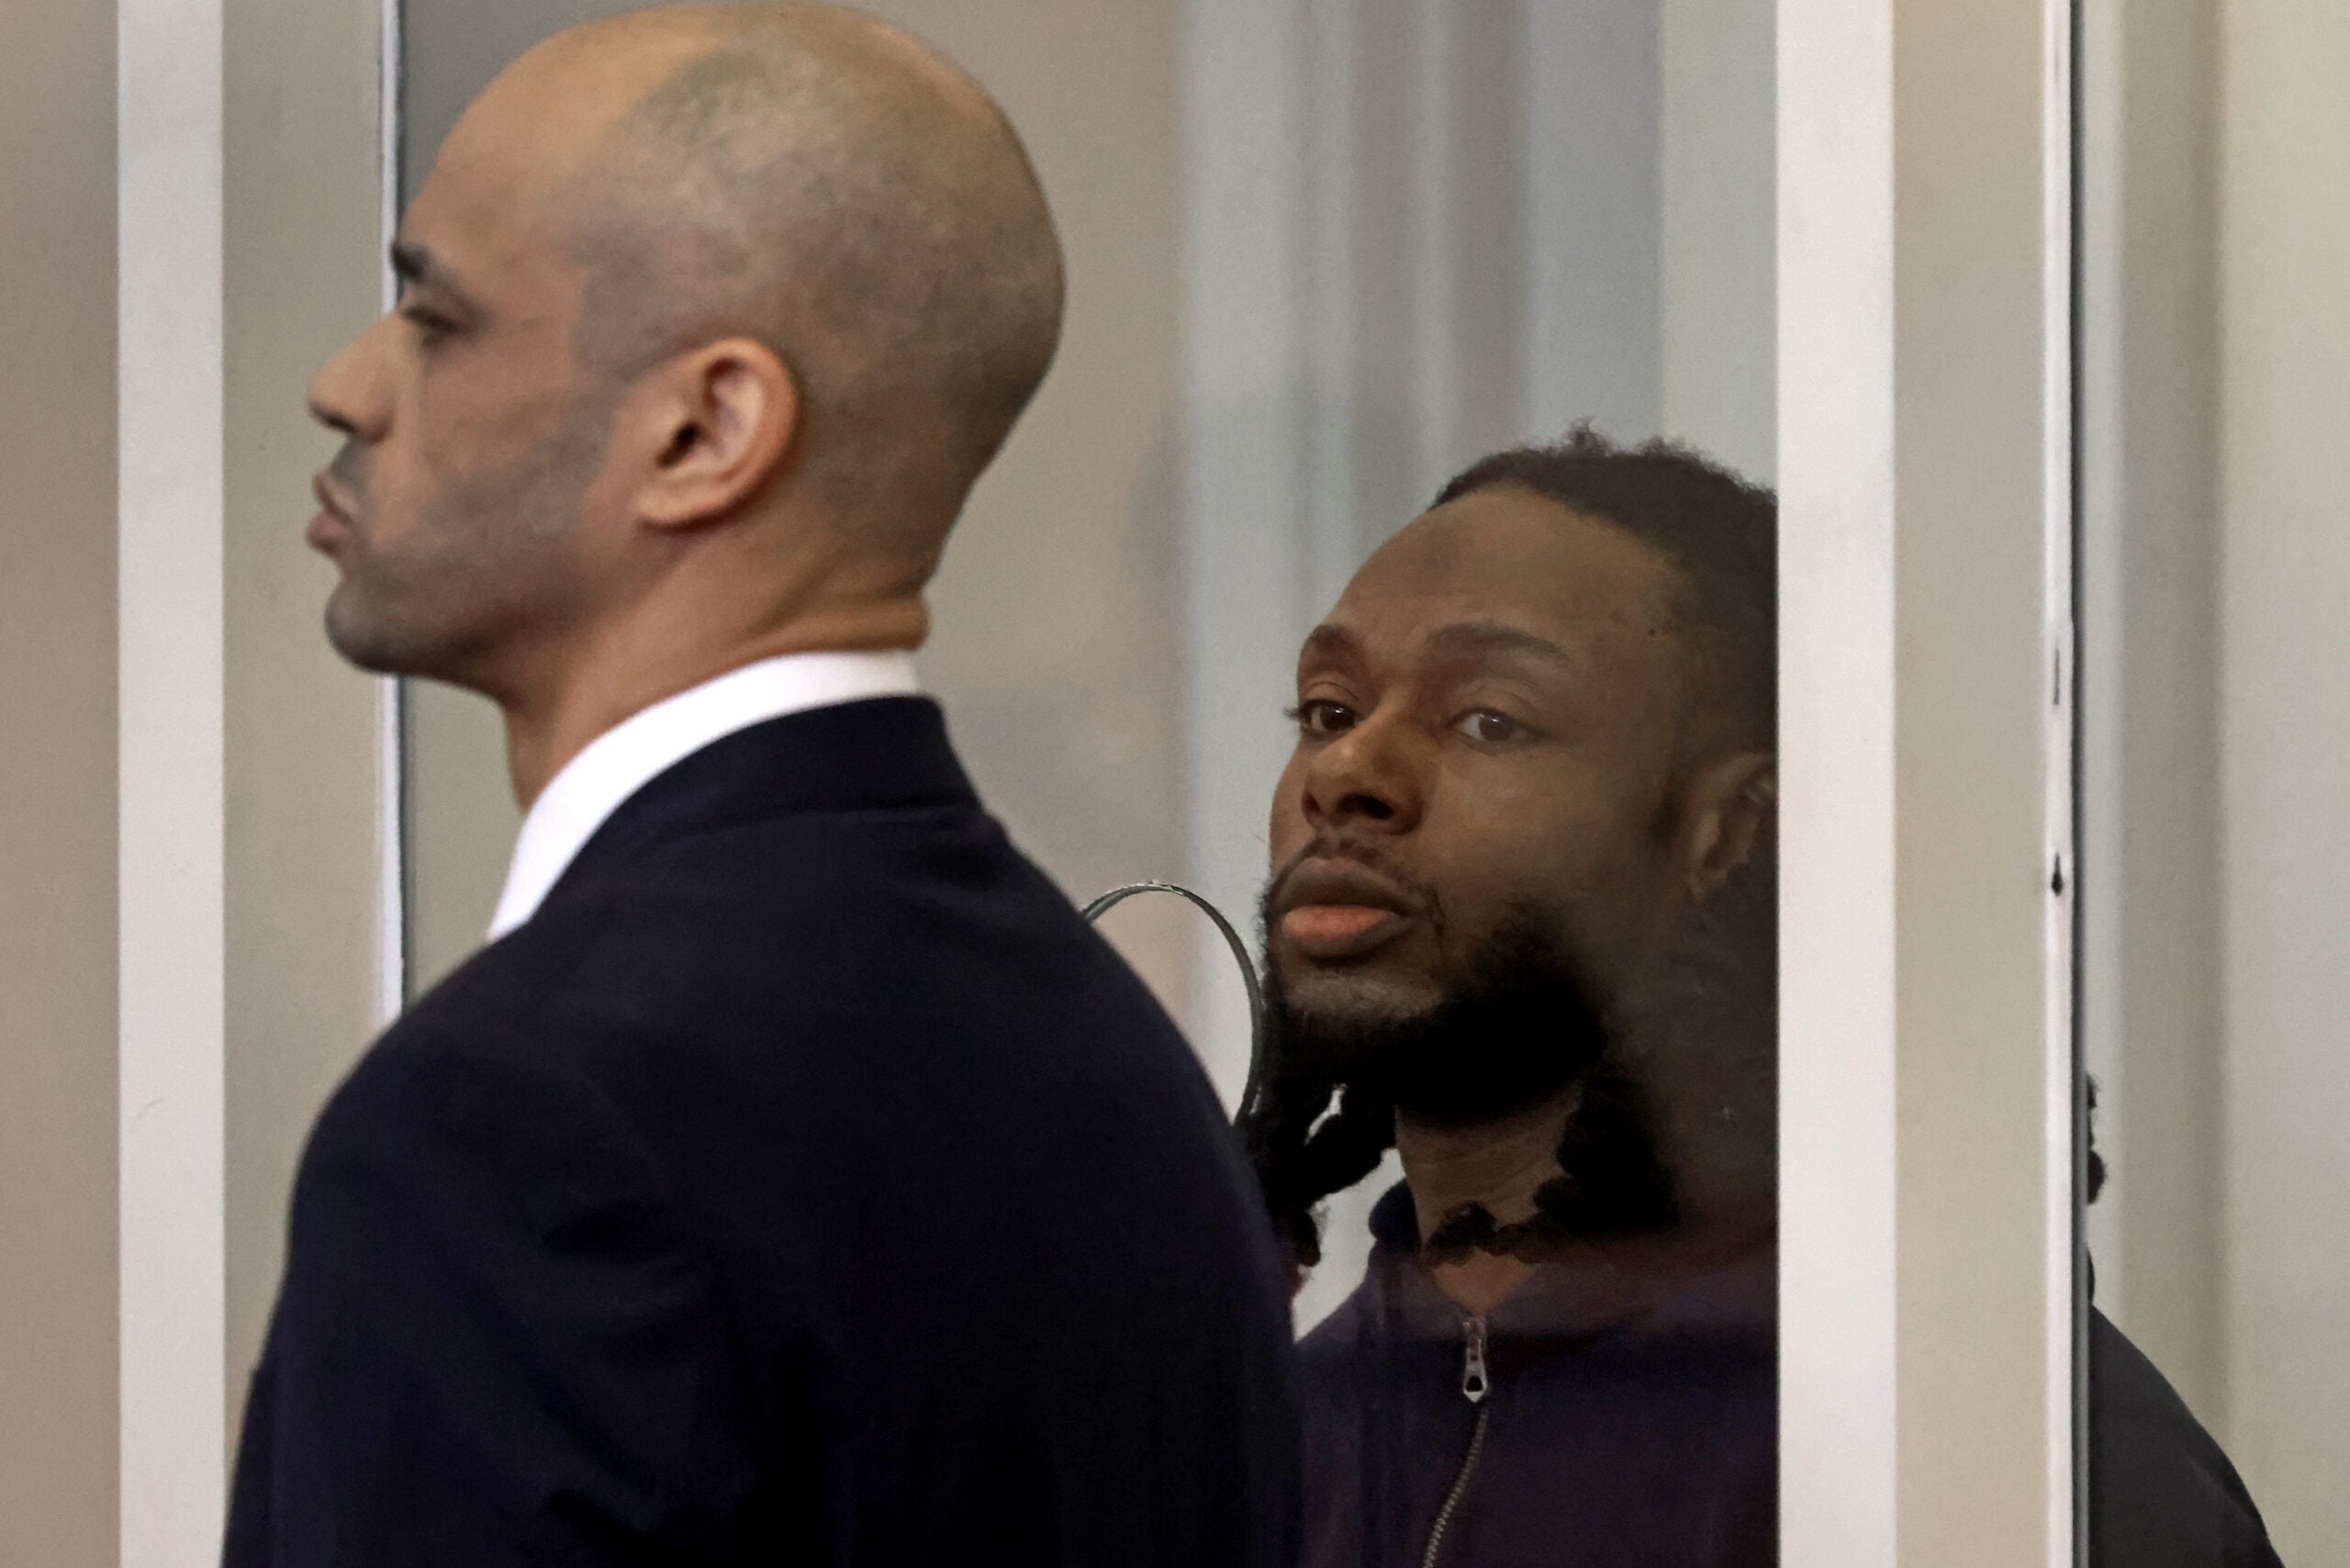 Csean Skerritt, 34, was arraigned in Dorchester Municipal Court Friday on murder and weapons charges stemming from the fatal shooting of 13-year-old Tyler Lawrence. He's shown standing in court with his attorney on the left.